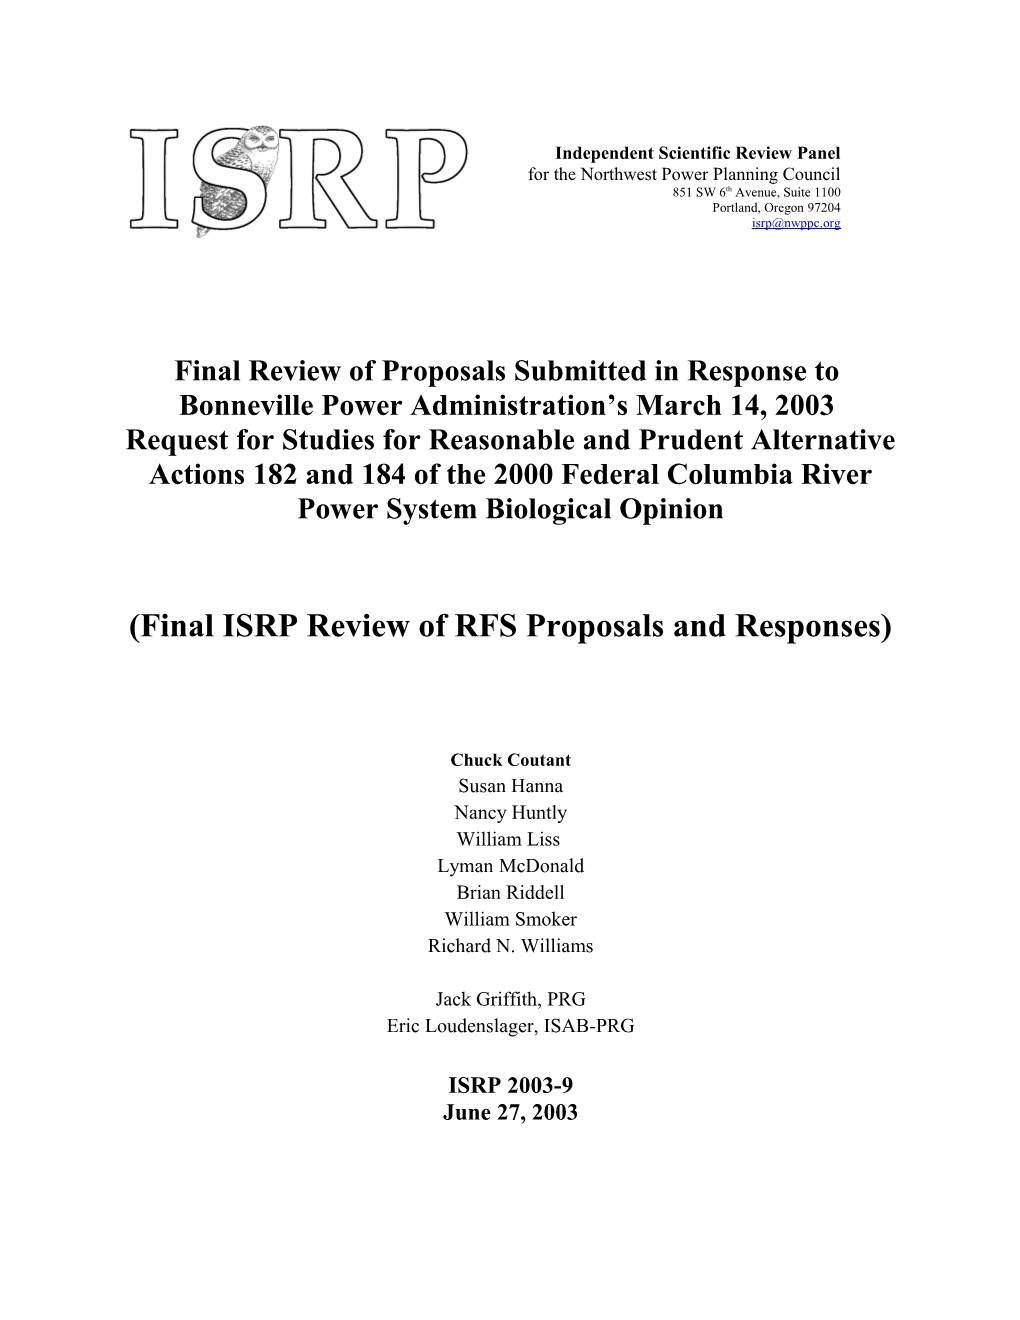 ISRP RFS Review Template